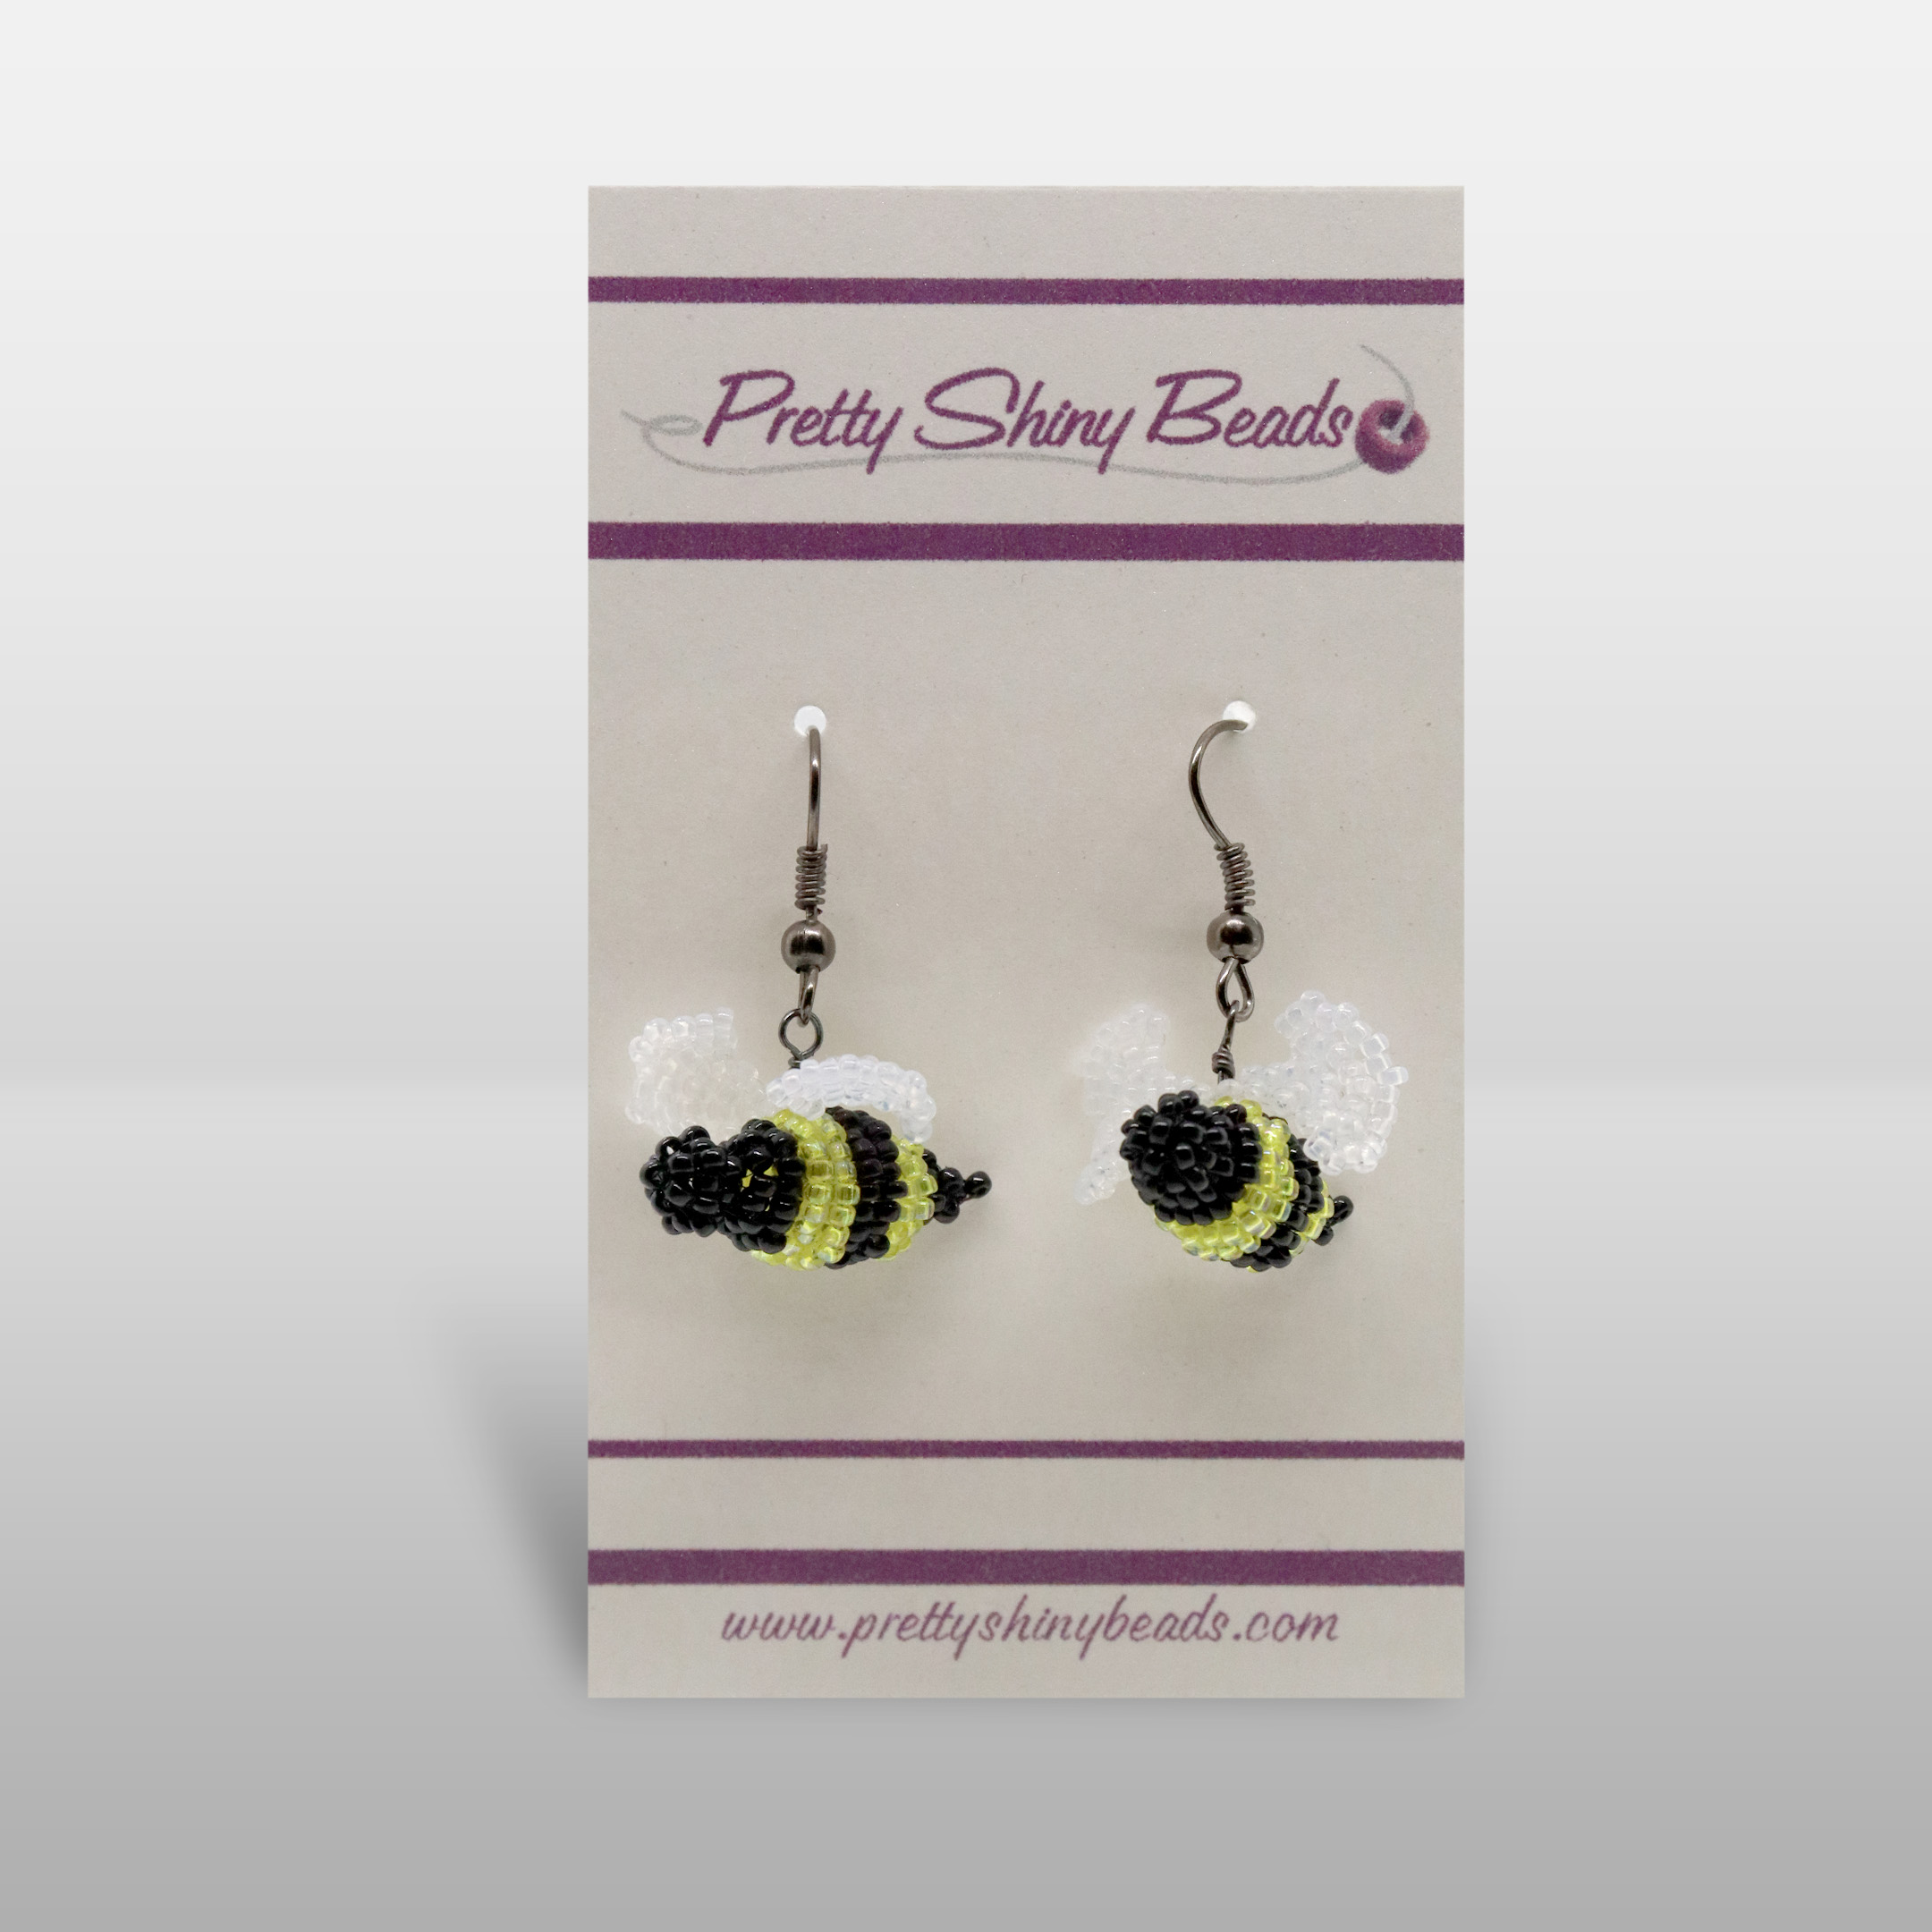 PSB_Earring_Bees-20240251_package